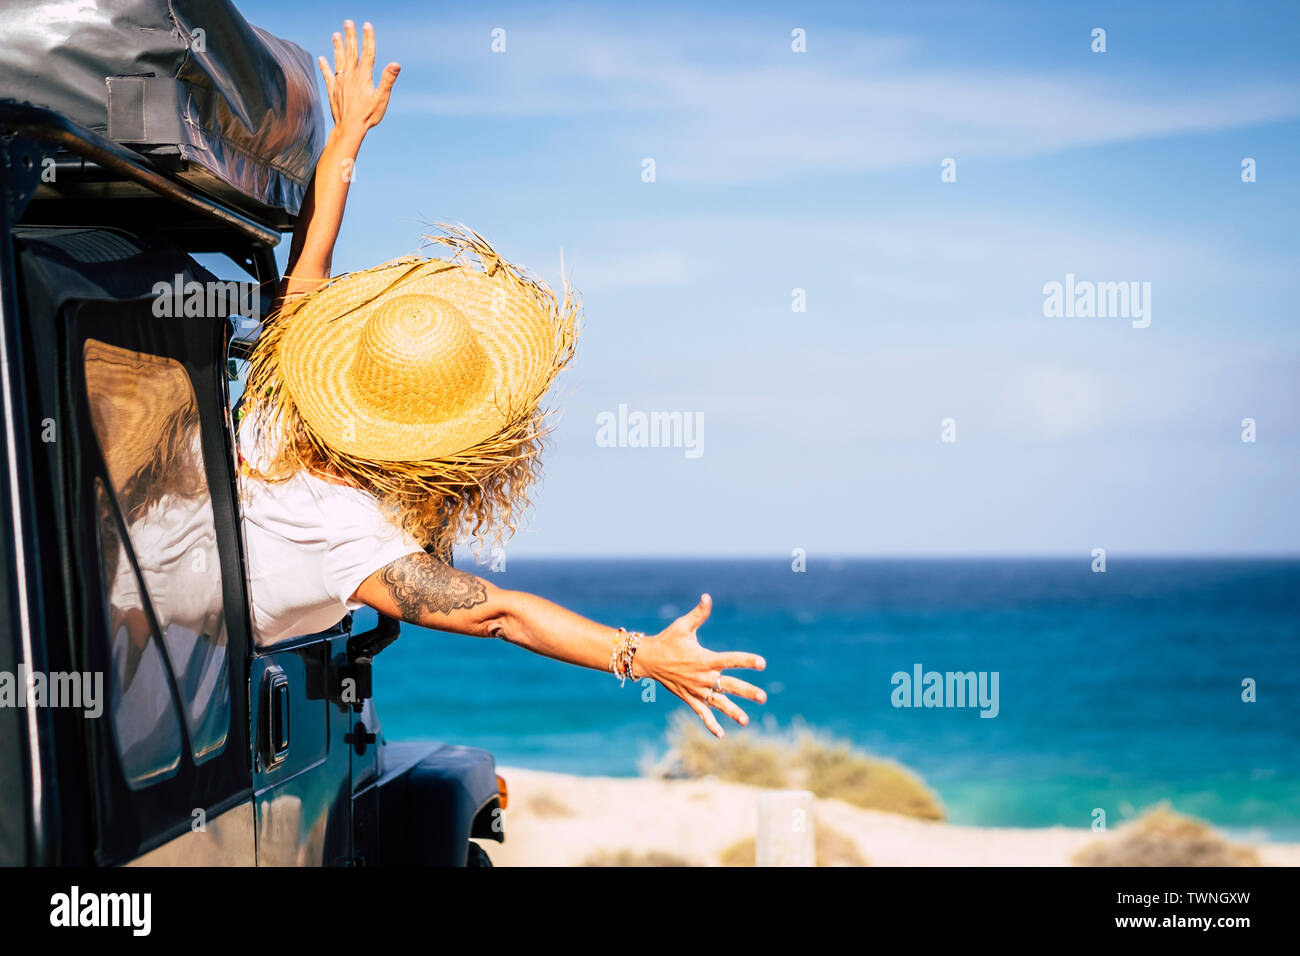 Travel and freedom concept with happiness and joy - people in summer holiday vacation - woman outside the car in front of a scenic beautiful beach and Stock Photo